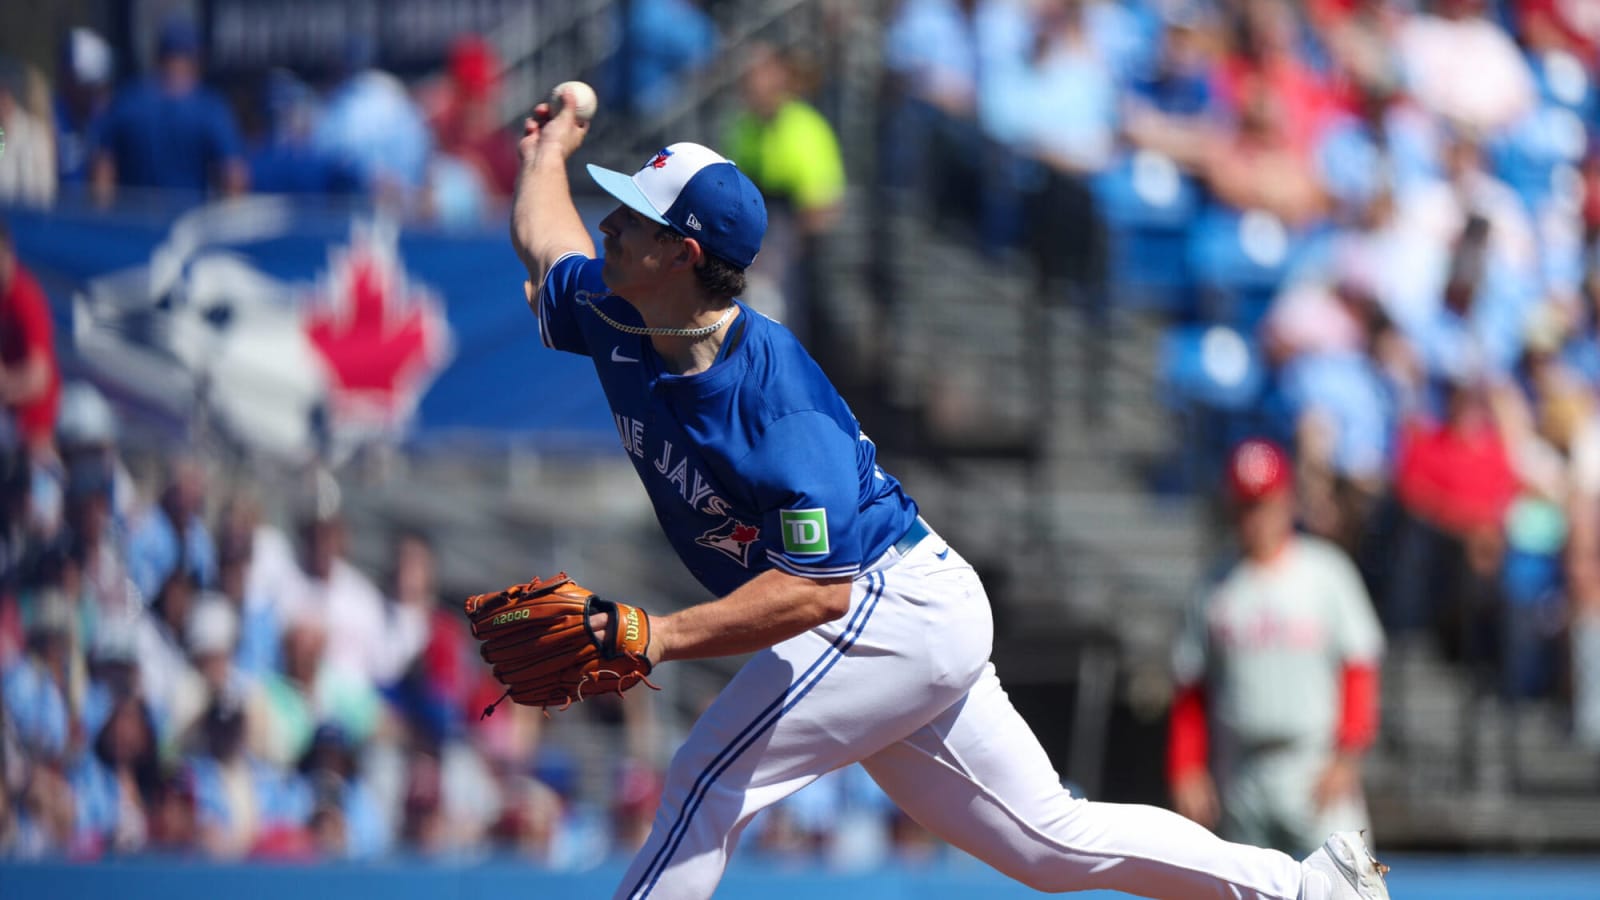 Adam Macko, Chad Dallas, Damiano Palmegiani among first wave of cuts from Blue Jays’ camp